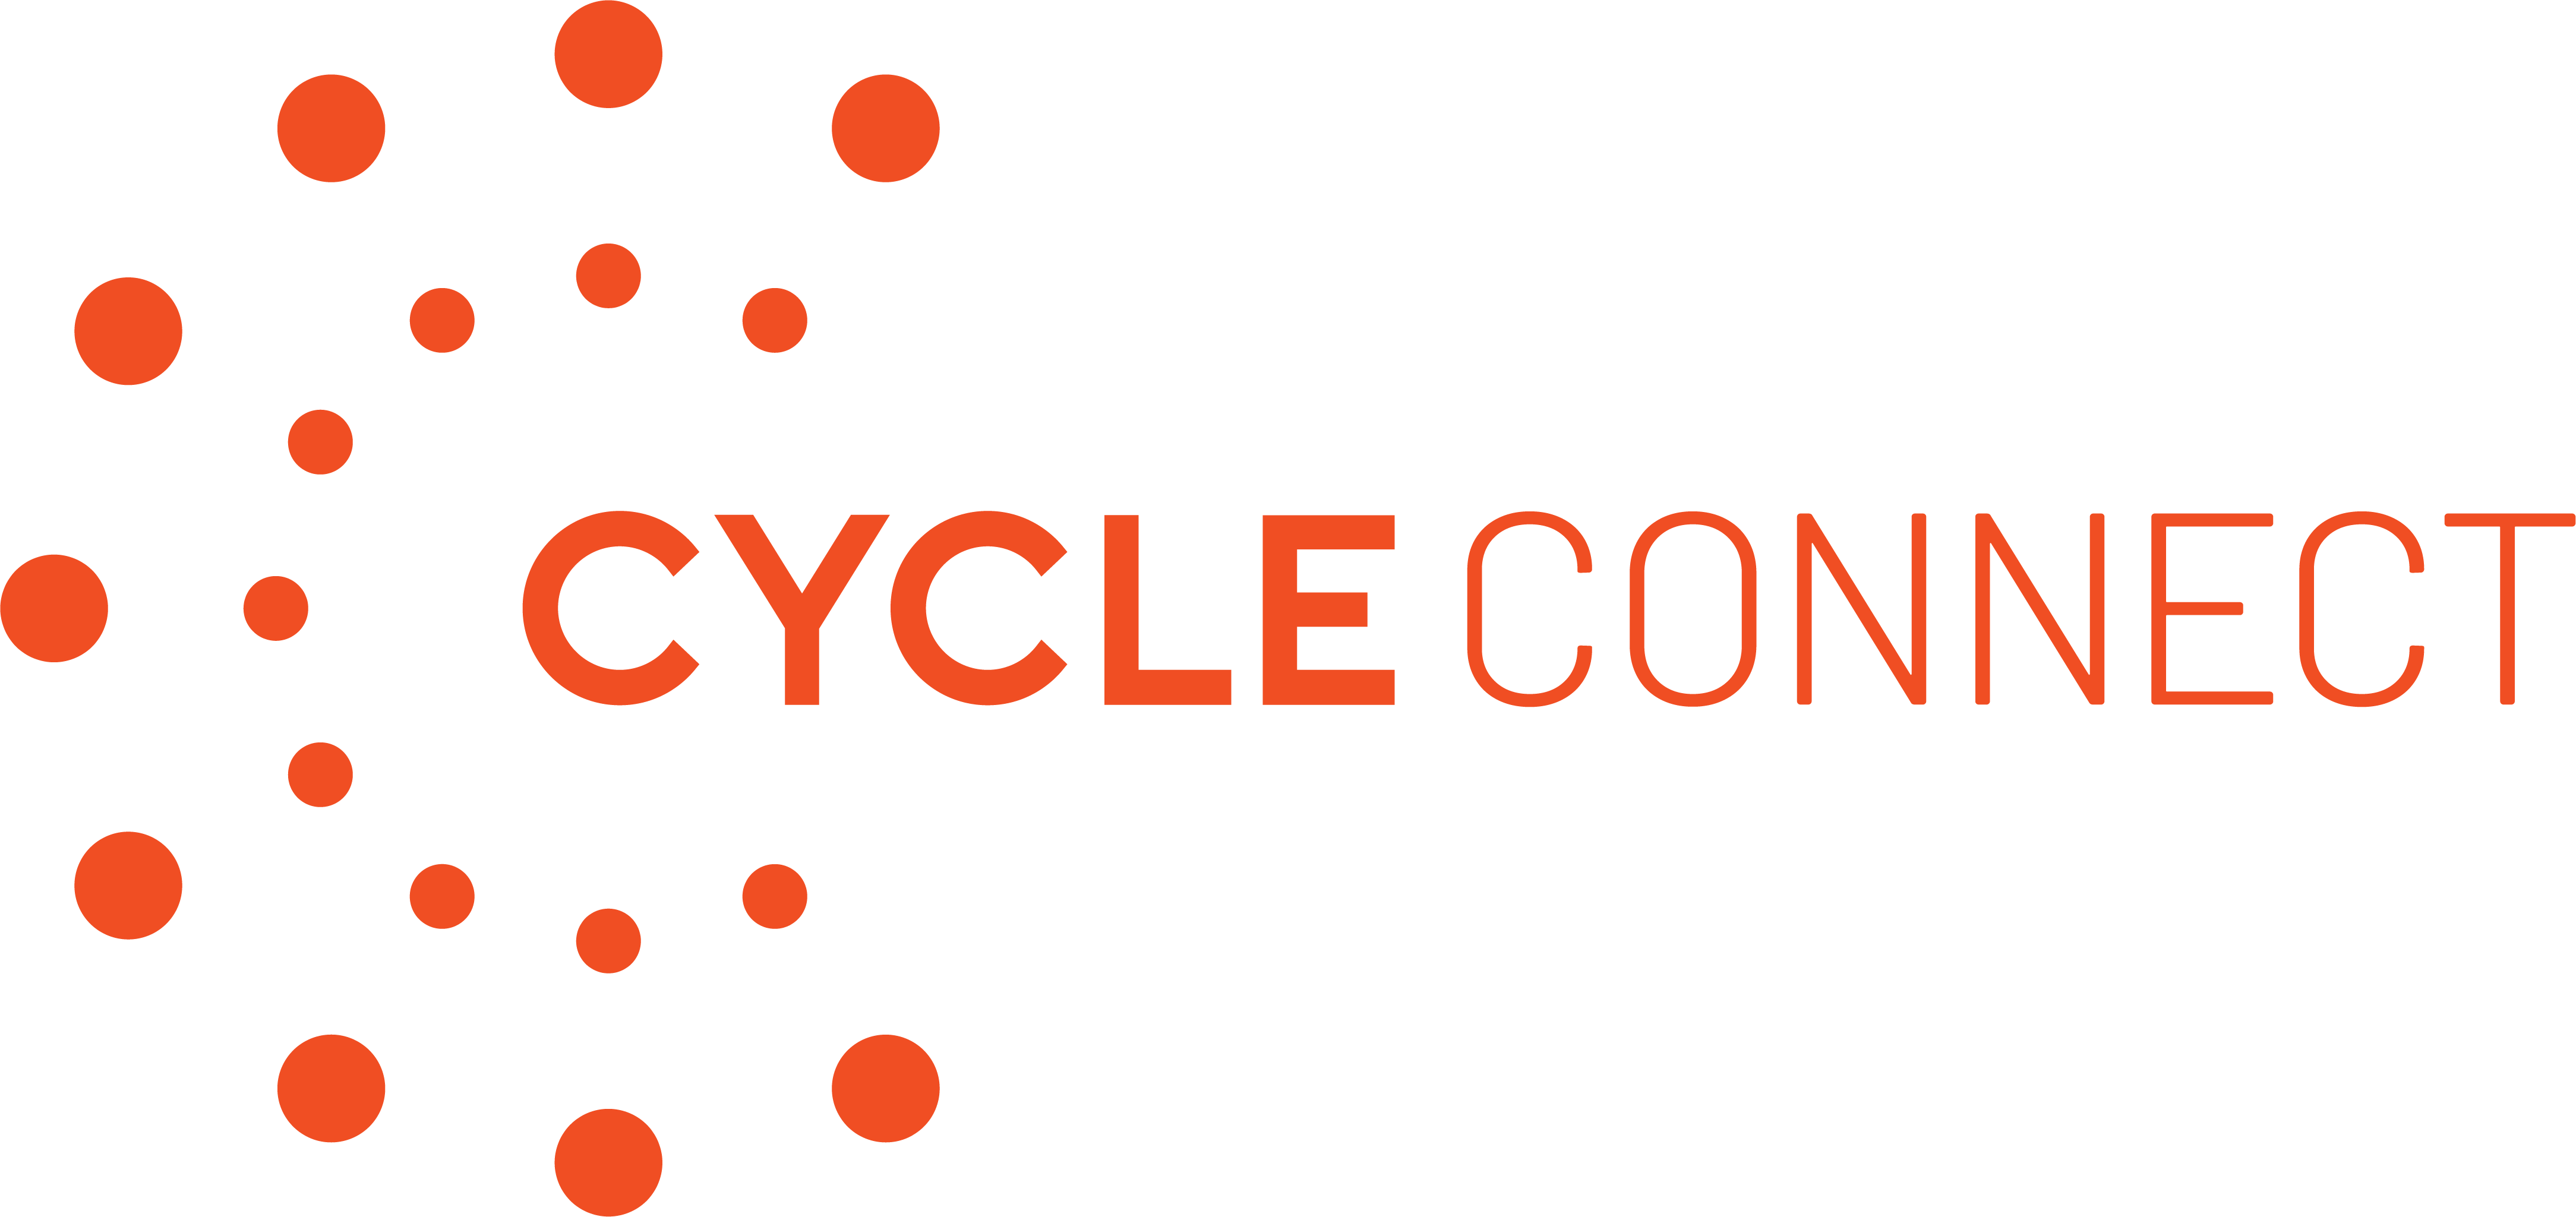 Cycle Connect